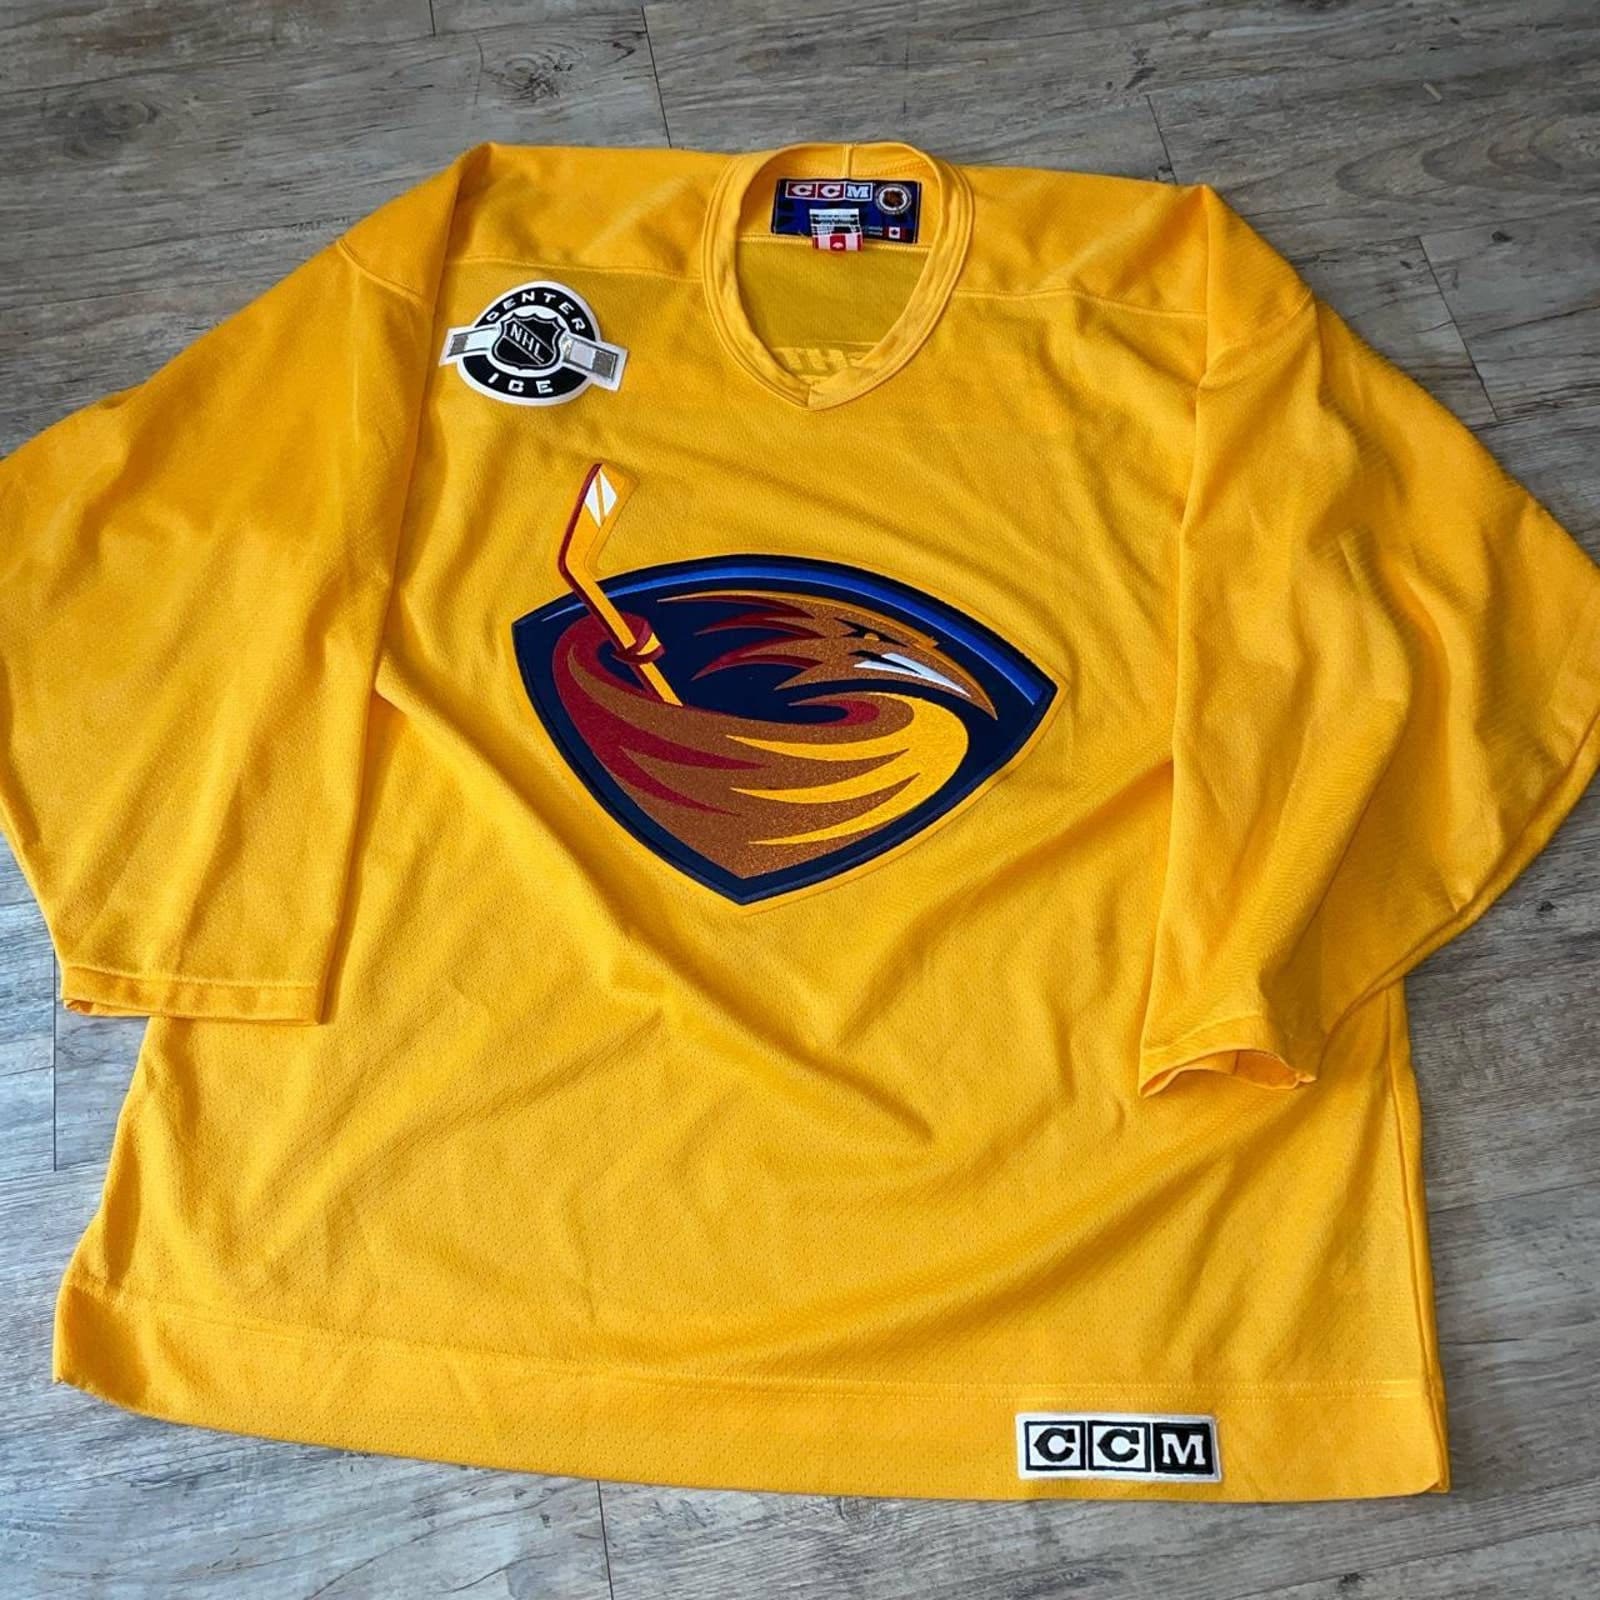  Outerstuff NHL Atlanta Thrashers Alternate Color Replica Jersey  - Youth Small/Medium : Sports & Outdoors